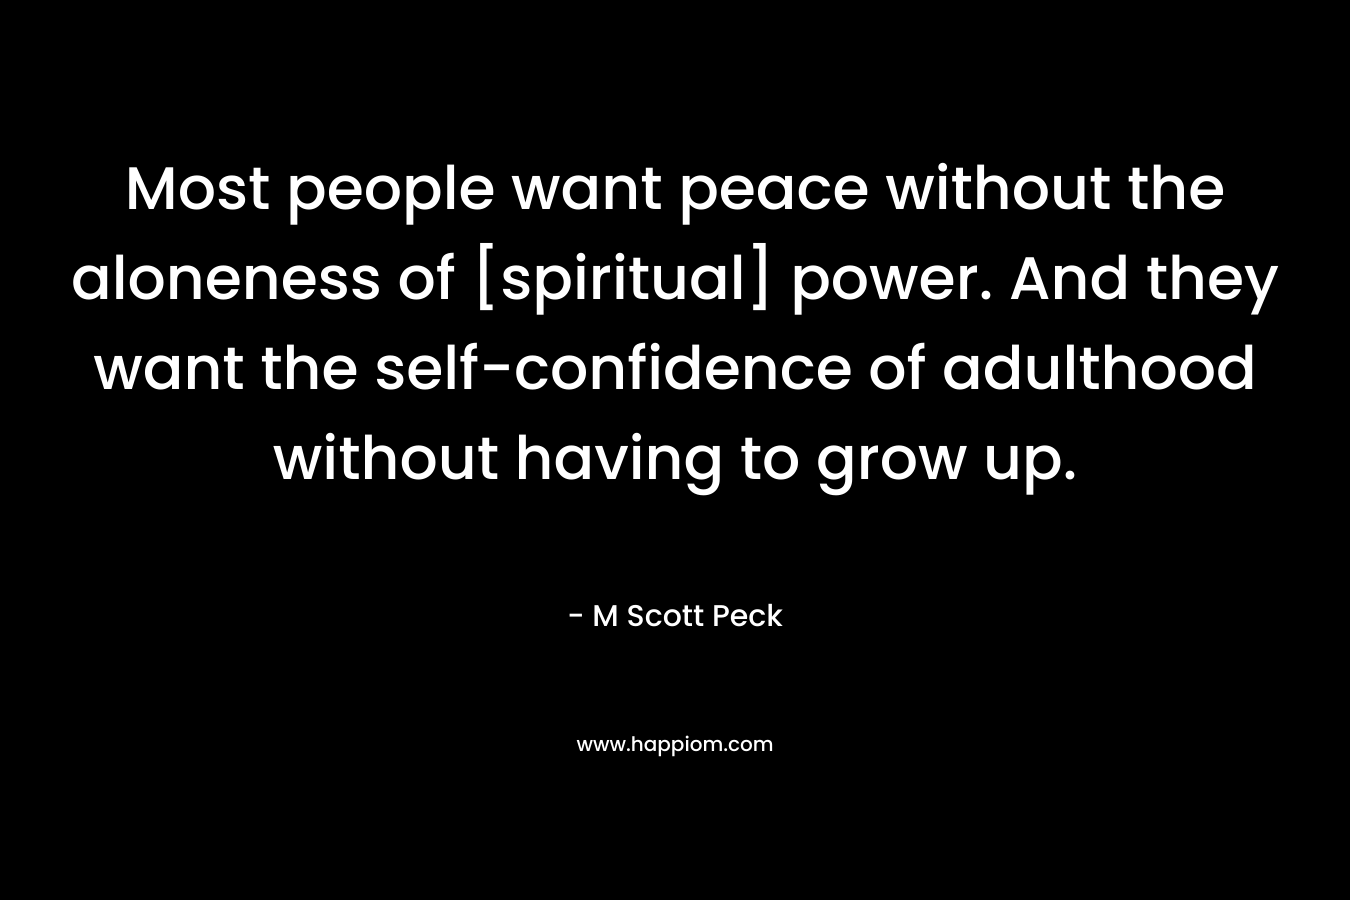 Most people want peace without the aloneness of [spiritual] power. And they want the self-confidence of adulthood without having to grow up.